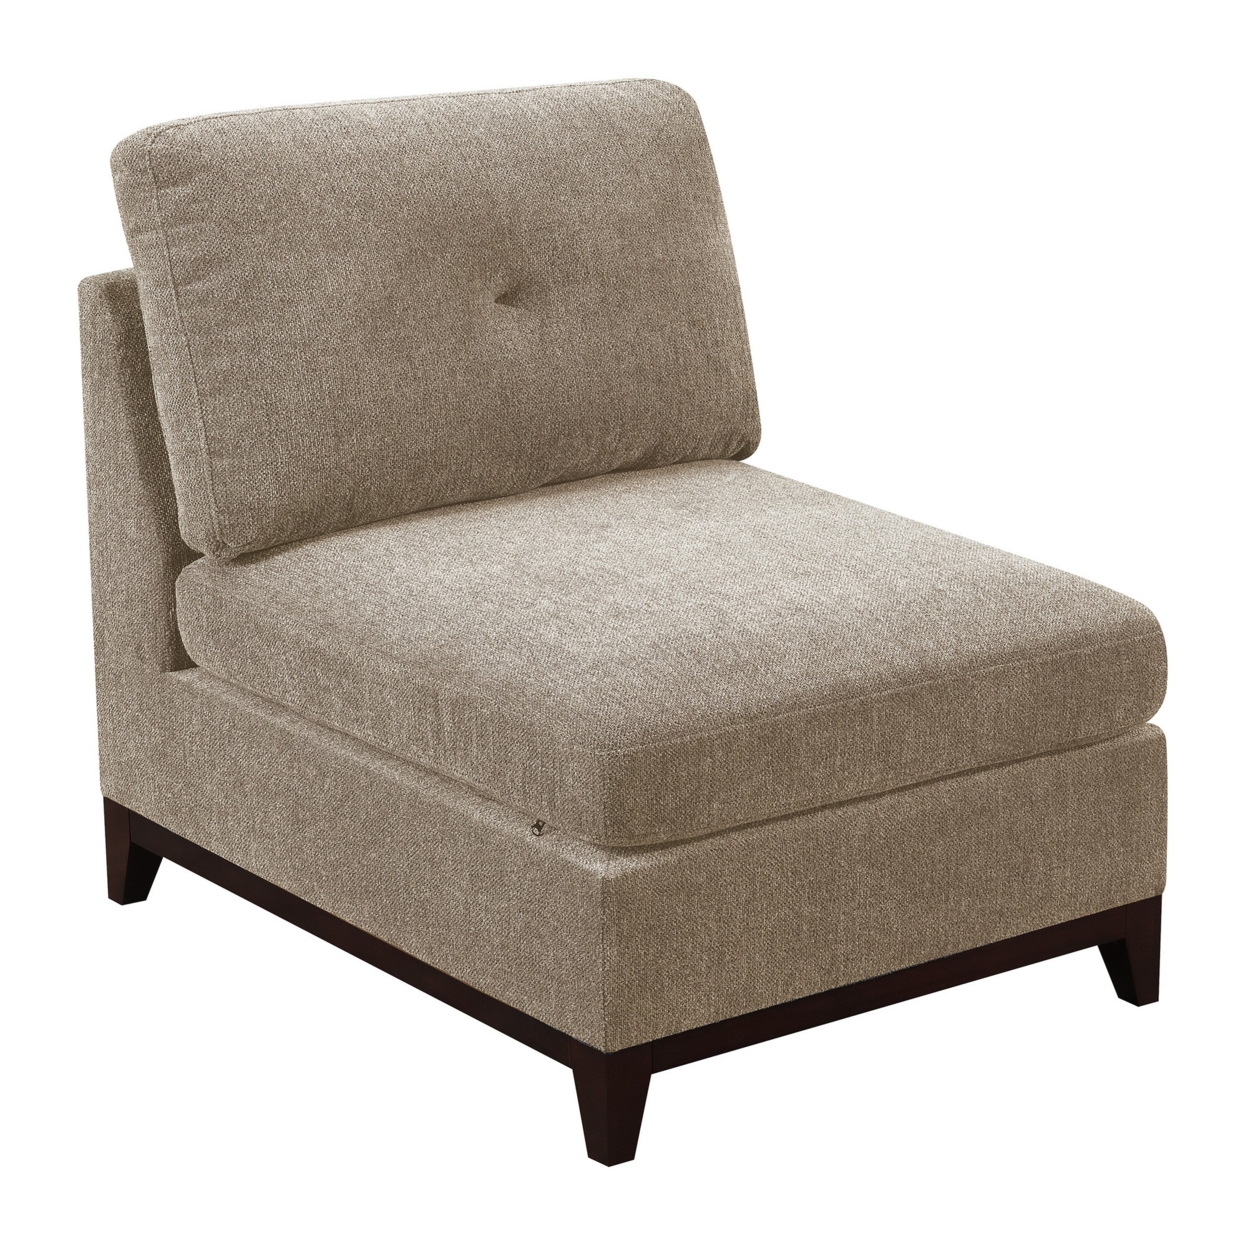 Fabric Armless Chair With Tufted Back Pillow, Gray- Saltoro Sherpi